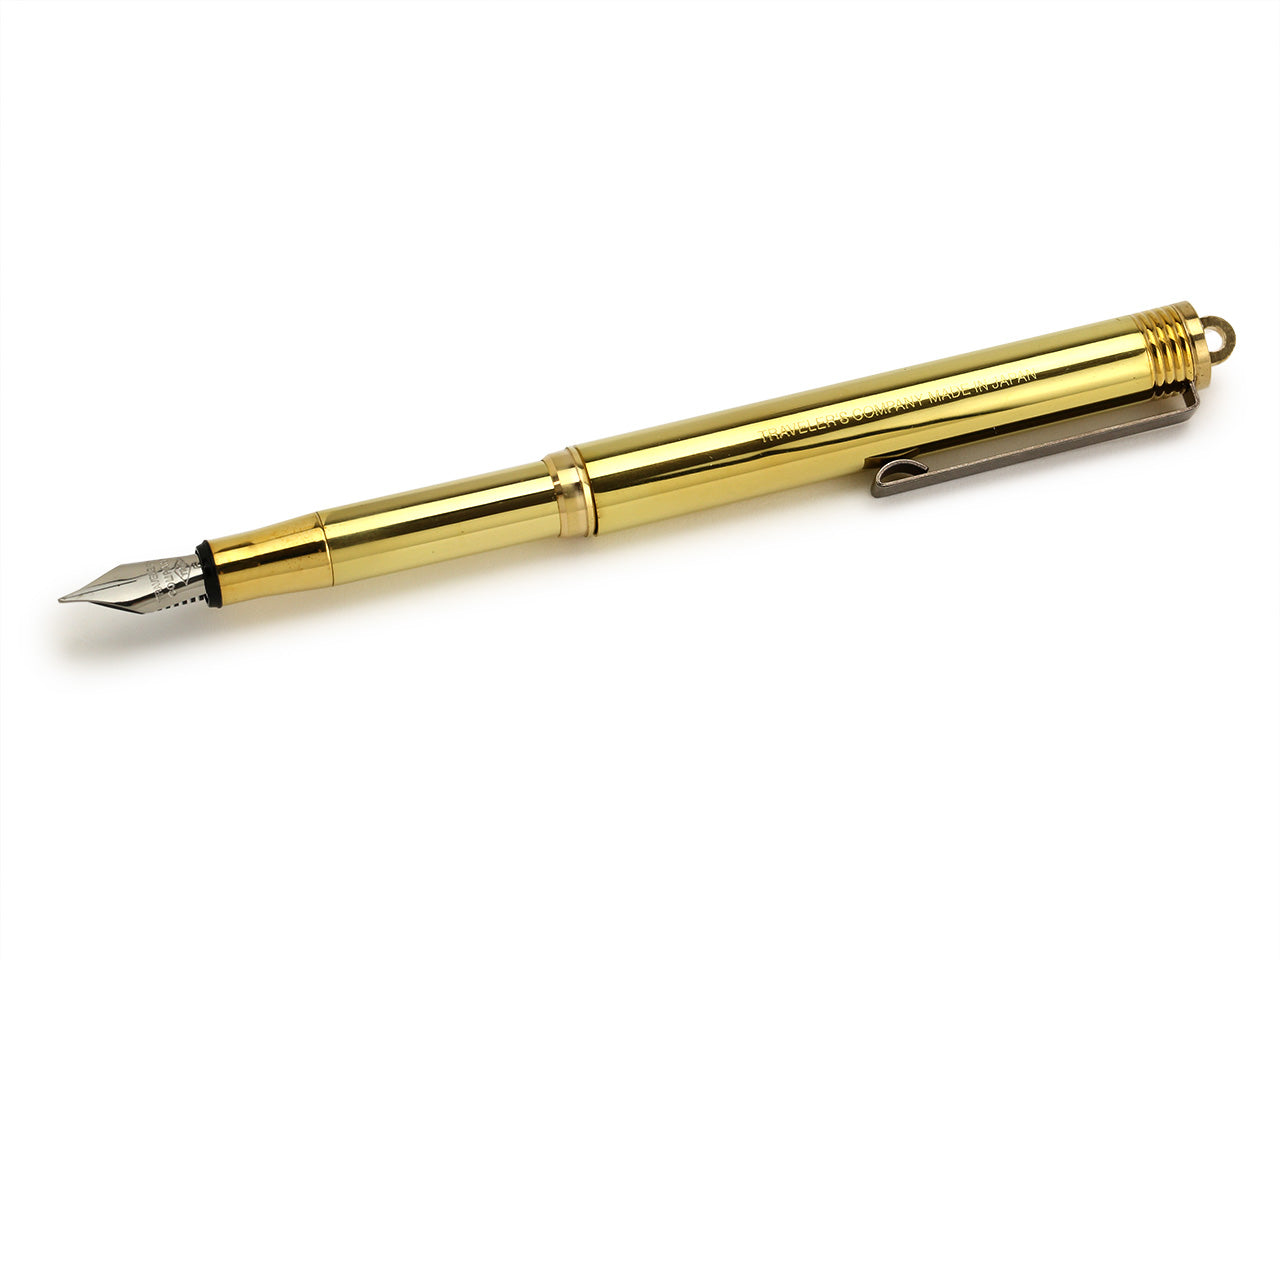 brass fountain pen fromTraveler's company Japan shows three-quarter side view fully posted